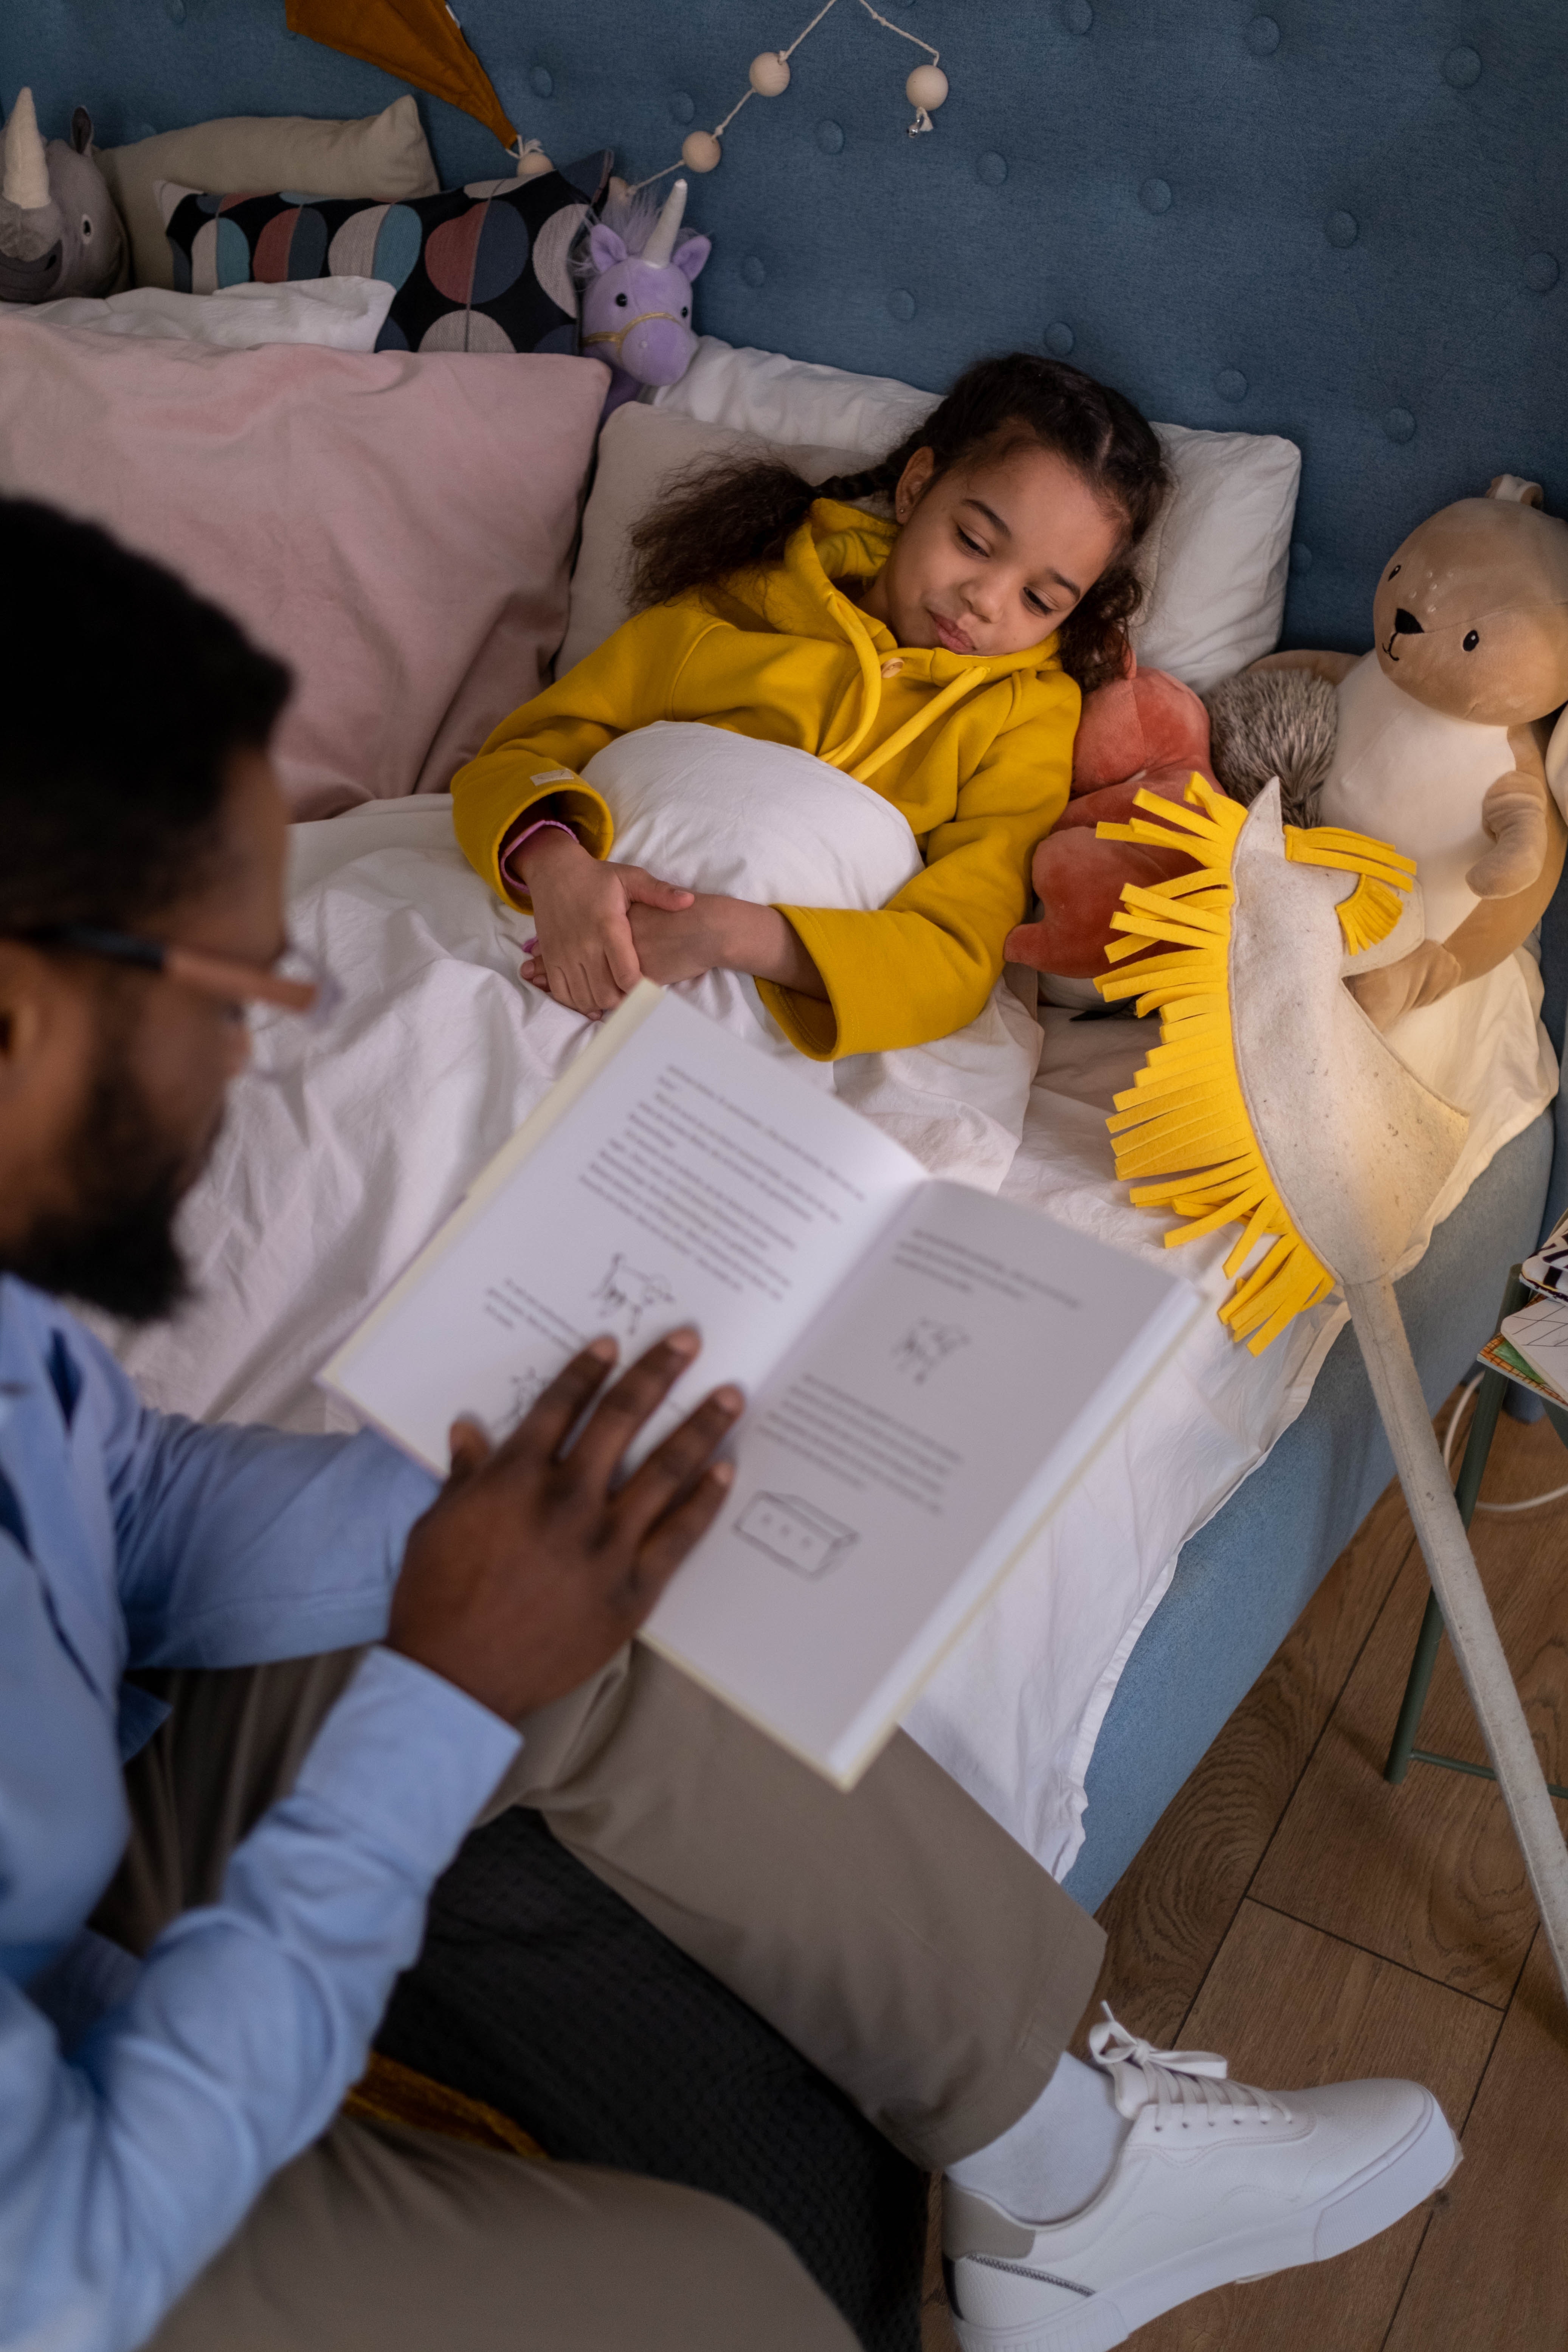 photo by cottonbro: https://www.pexels.com/photo/a-father-reading-bedtime-story-to-his-daughter-6591638/